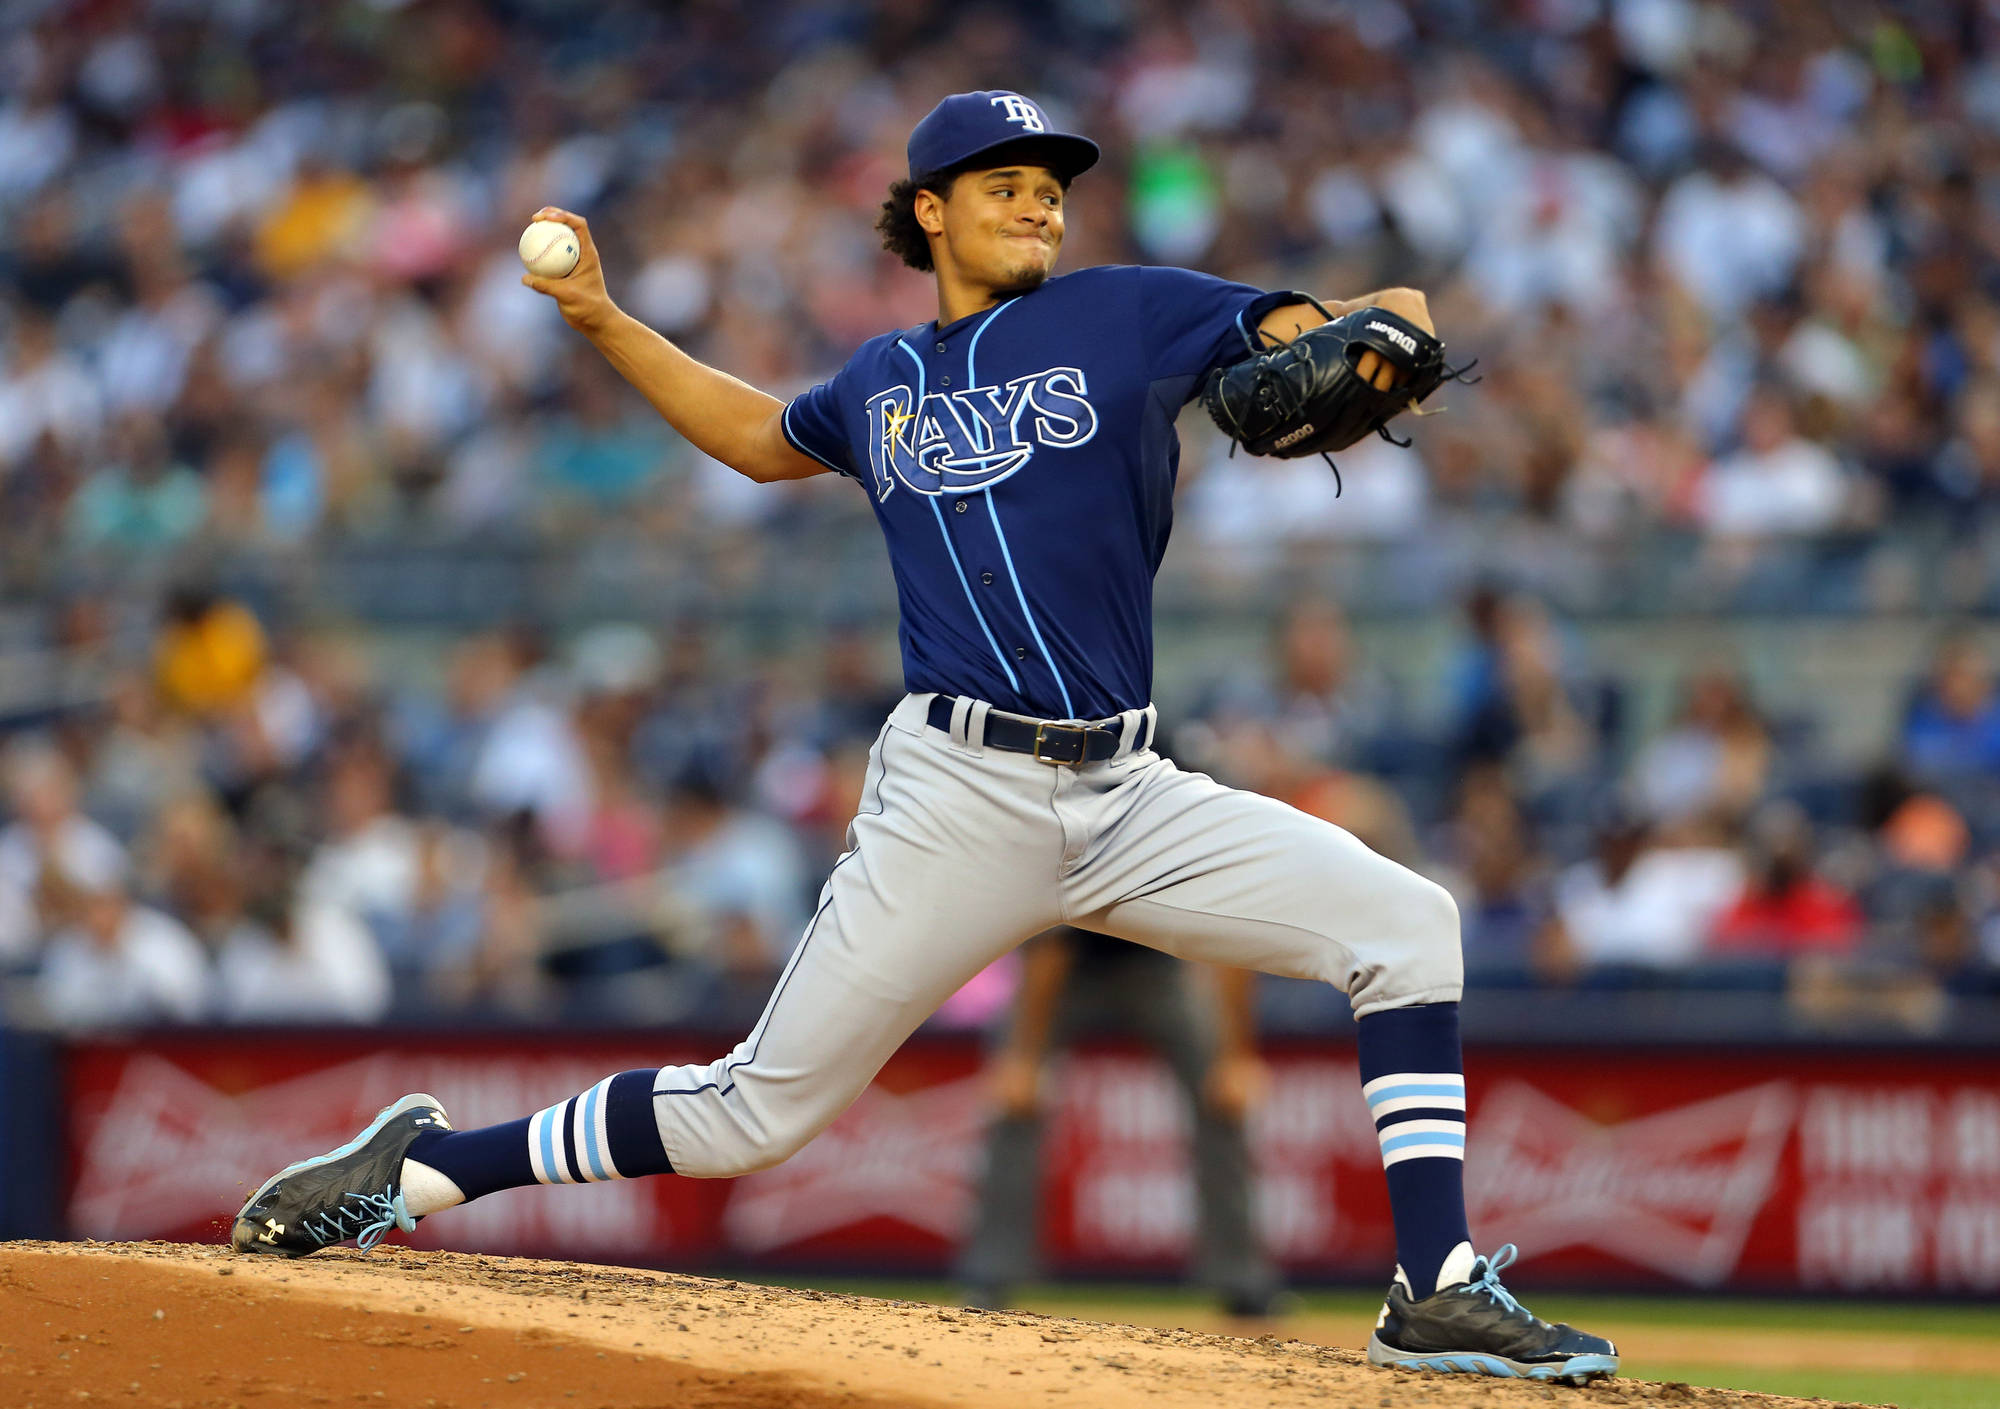 The Tampa Bay Rays traded for Chris Archer in 2011. Might they trade him away five years later? (Photo Credit: Adam Hunger/USA Today Sports)